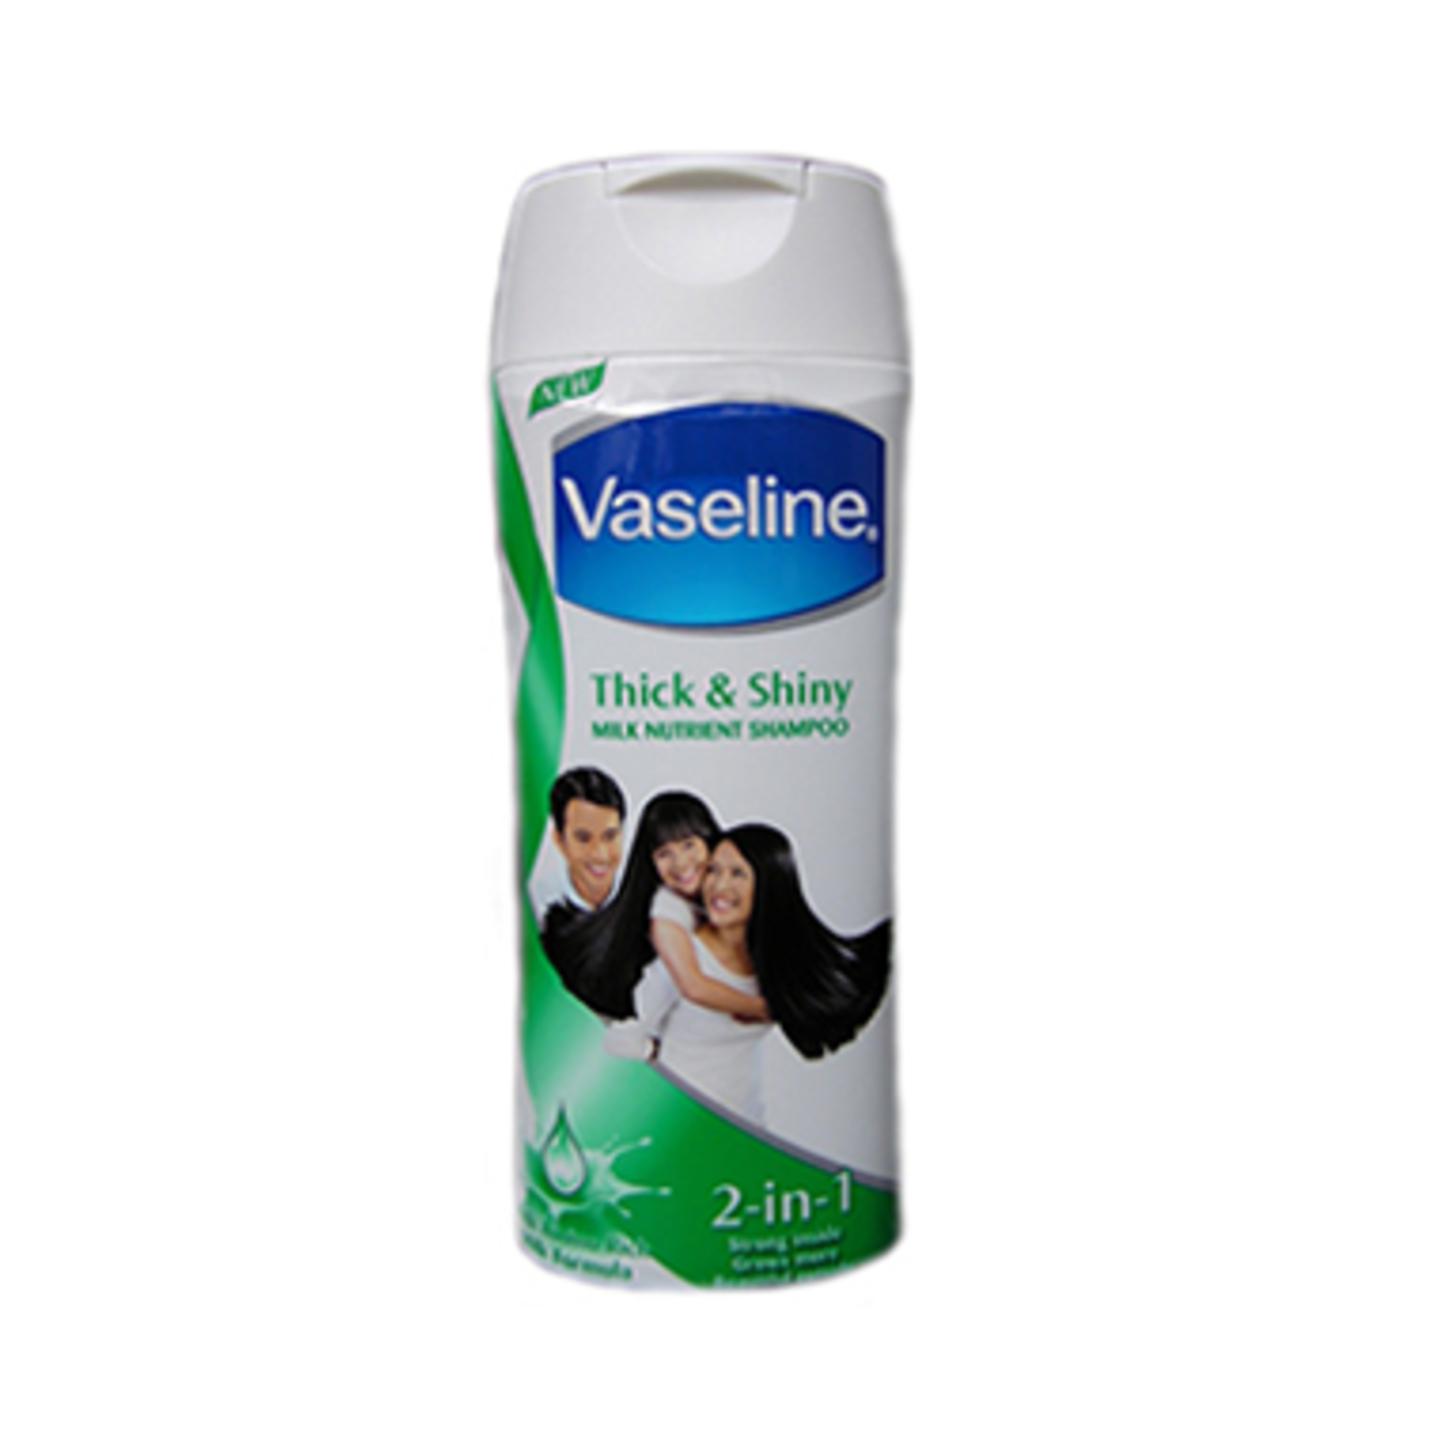 Vaseline Thick and Shiny 2-in-1 200ml